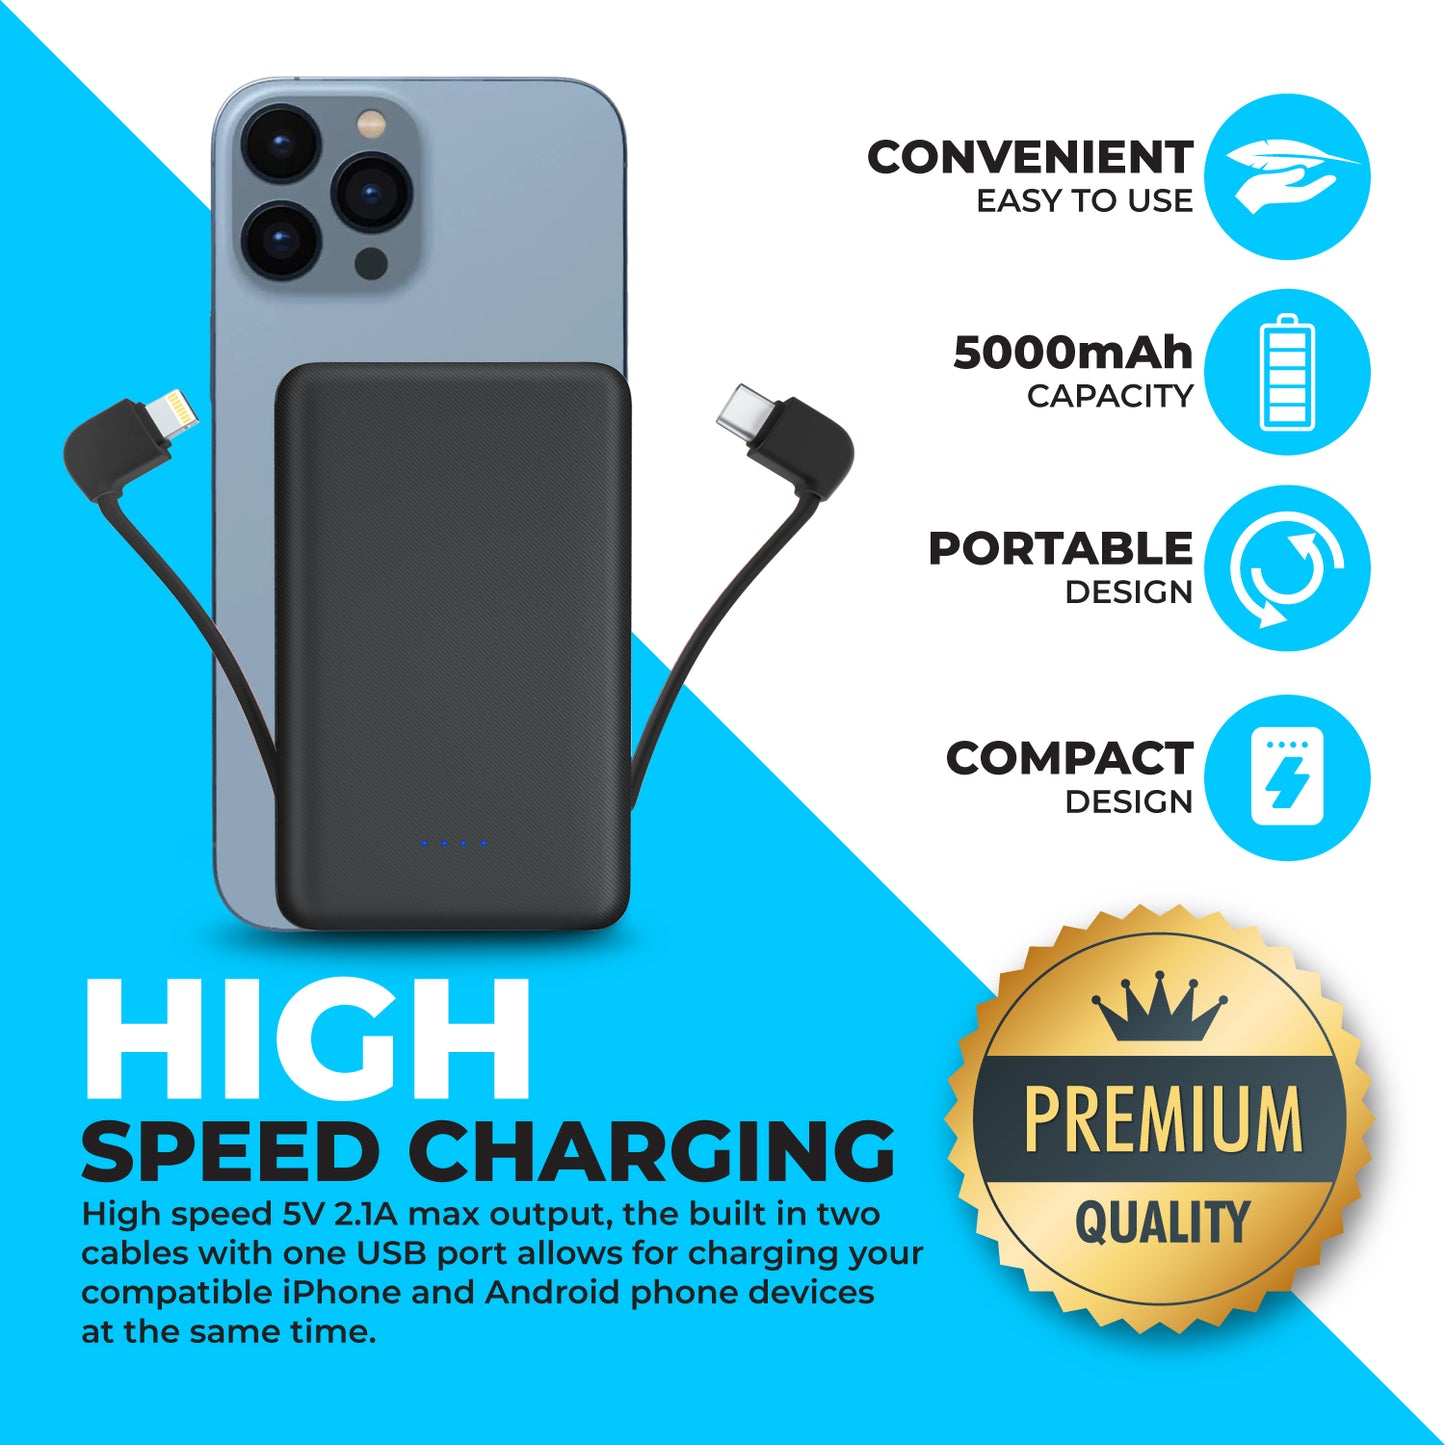 Slim Portable Charger 5000mAh - Compact Mini Small Power Bank Built-in Cable Cute Mobile Cell Phone External Battery Pack 5V 2.1A USB-C Compatible with iPhones 6/7/8/X/XS/XR/11/12/13/14 Airpods